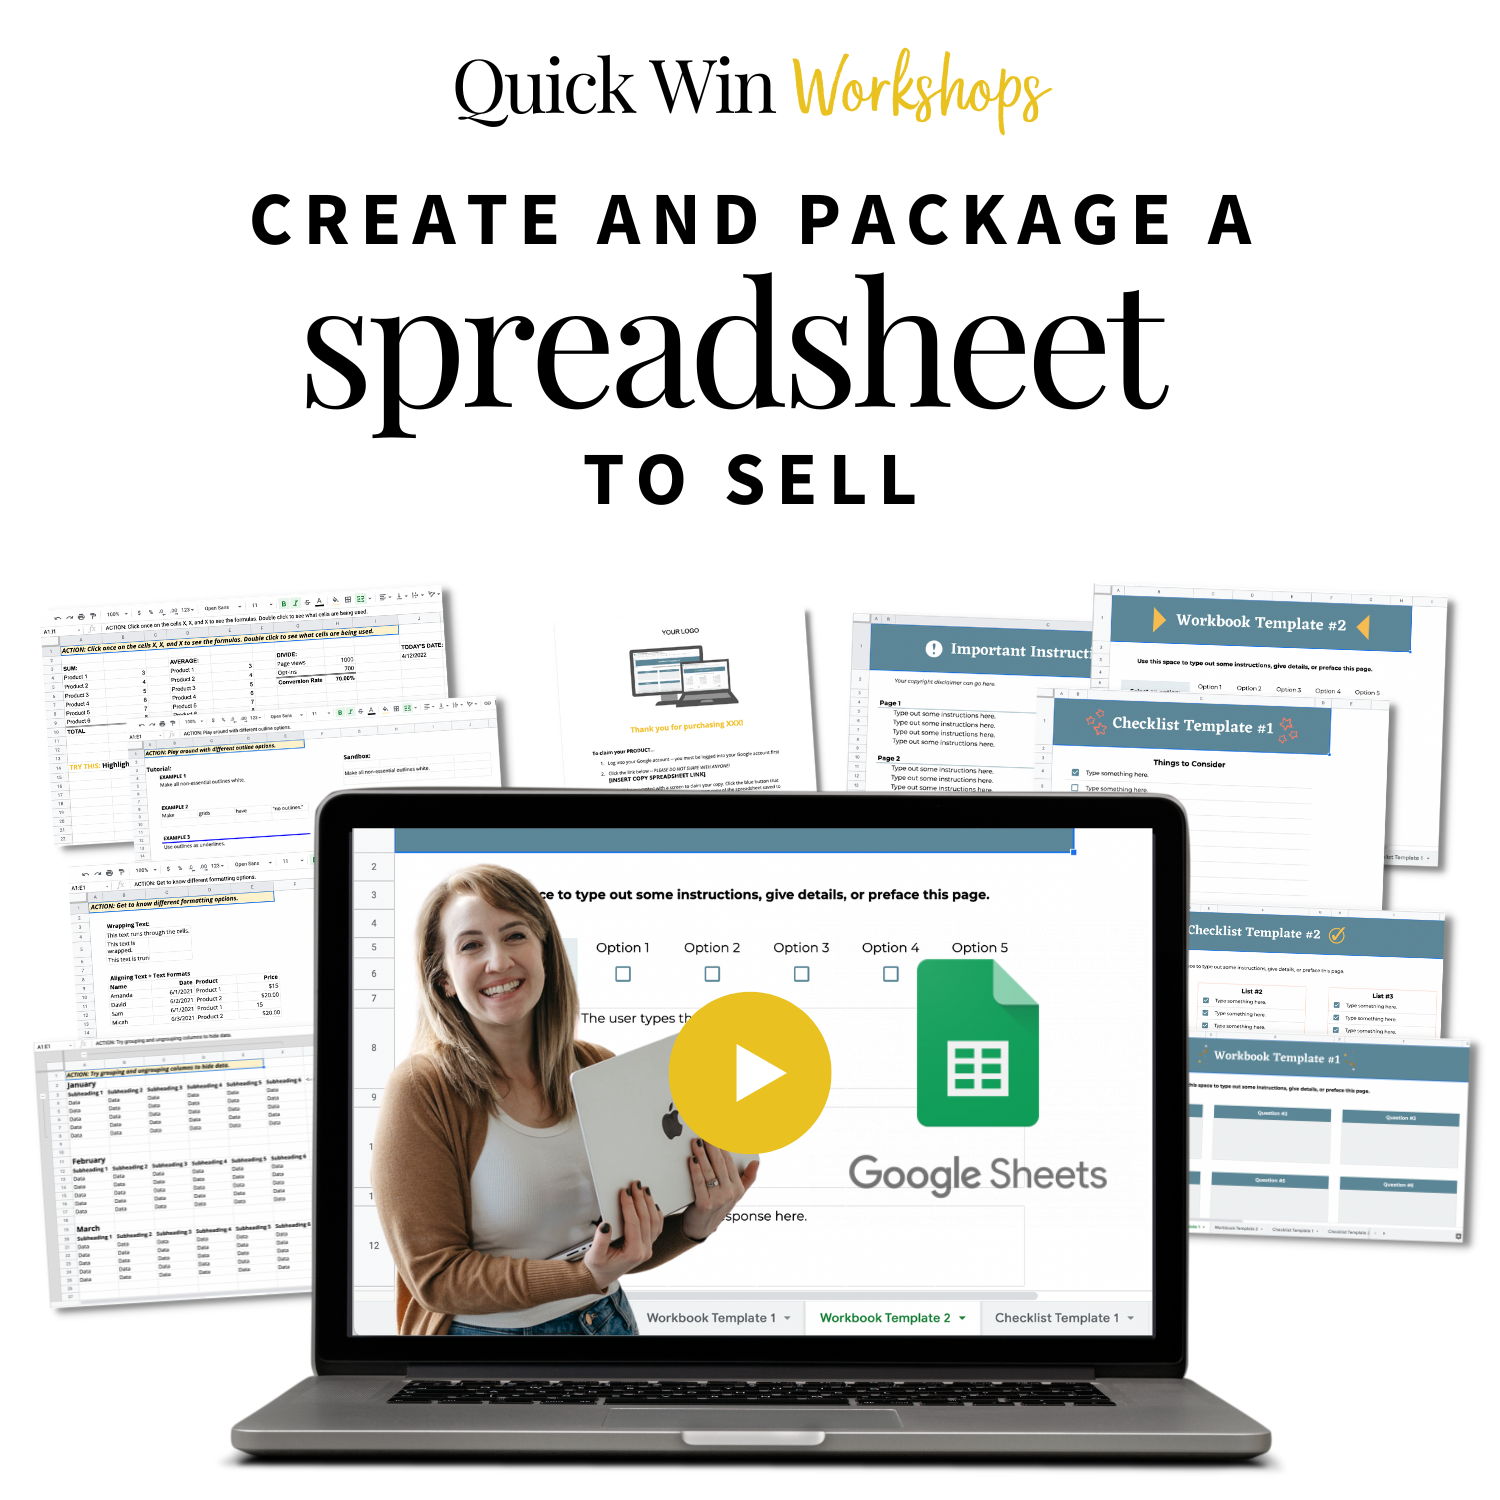 Quick Win Workshops: Create and Package a Spreadsheet to Sell as a Digital Product